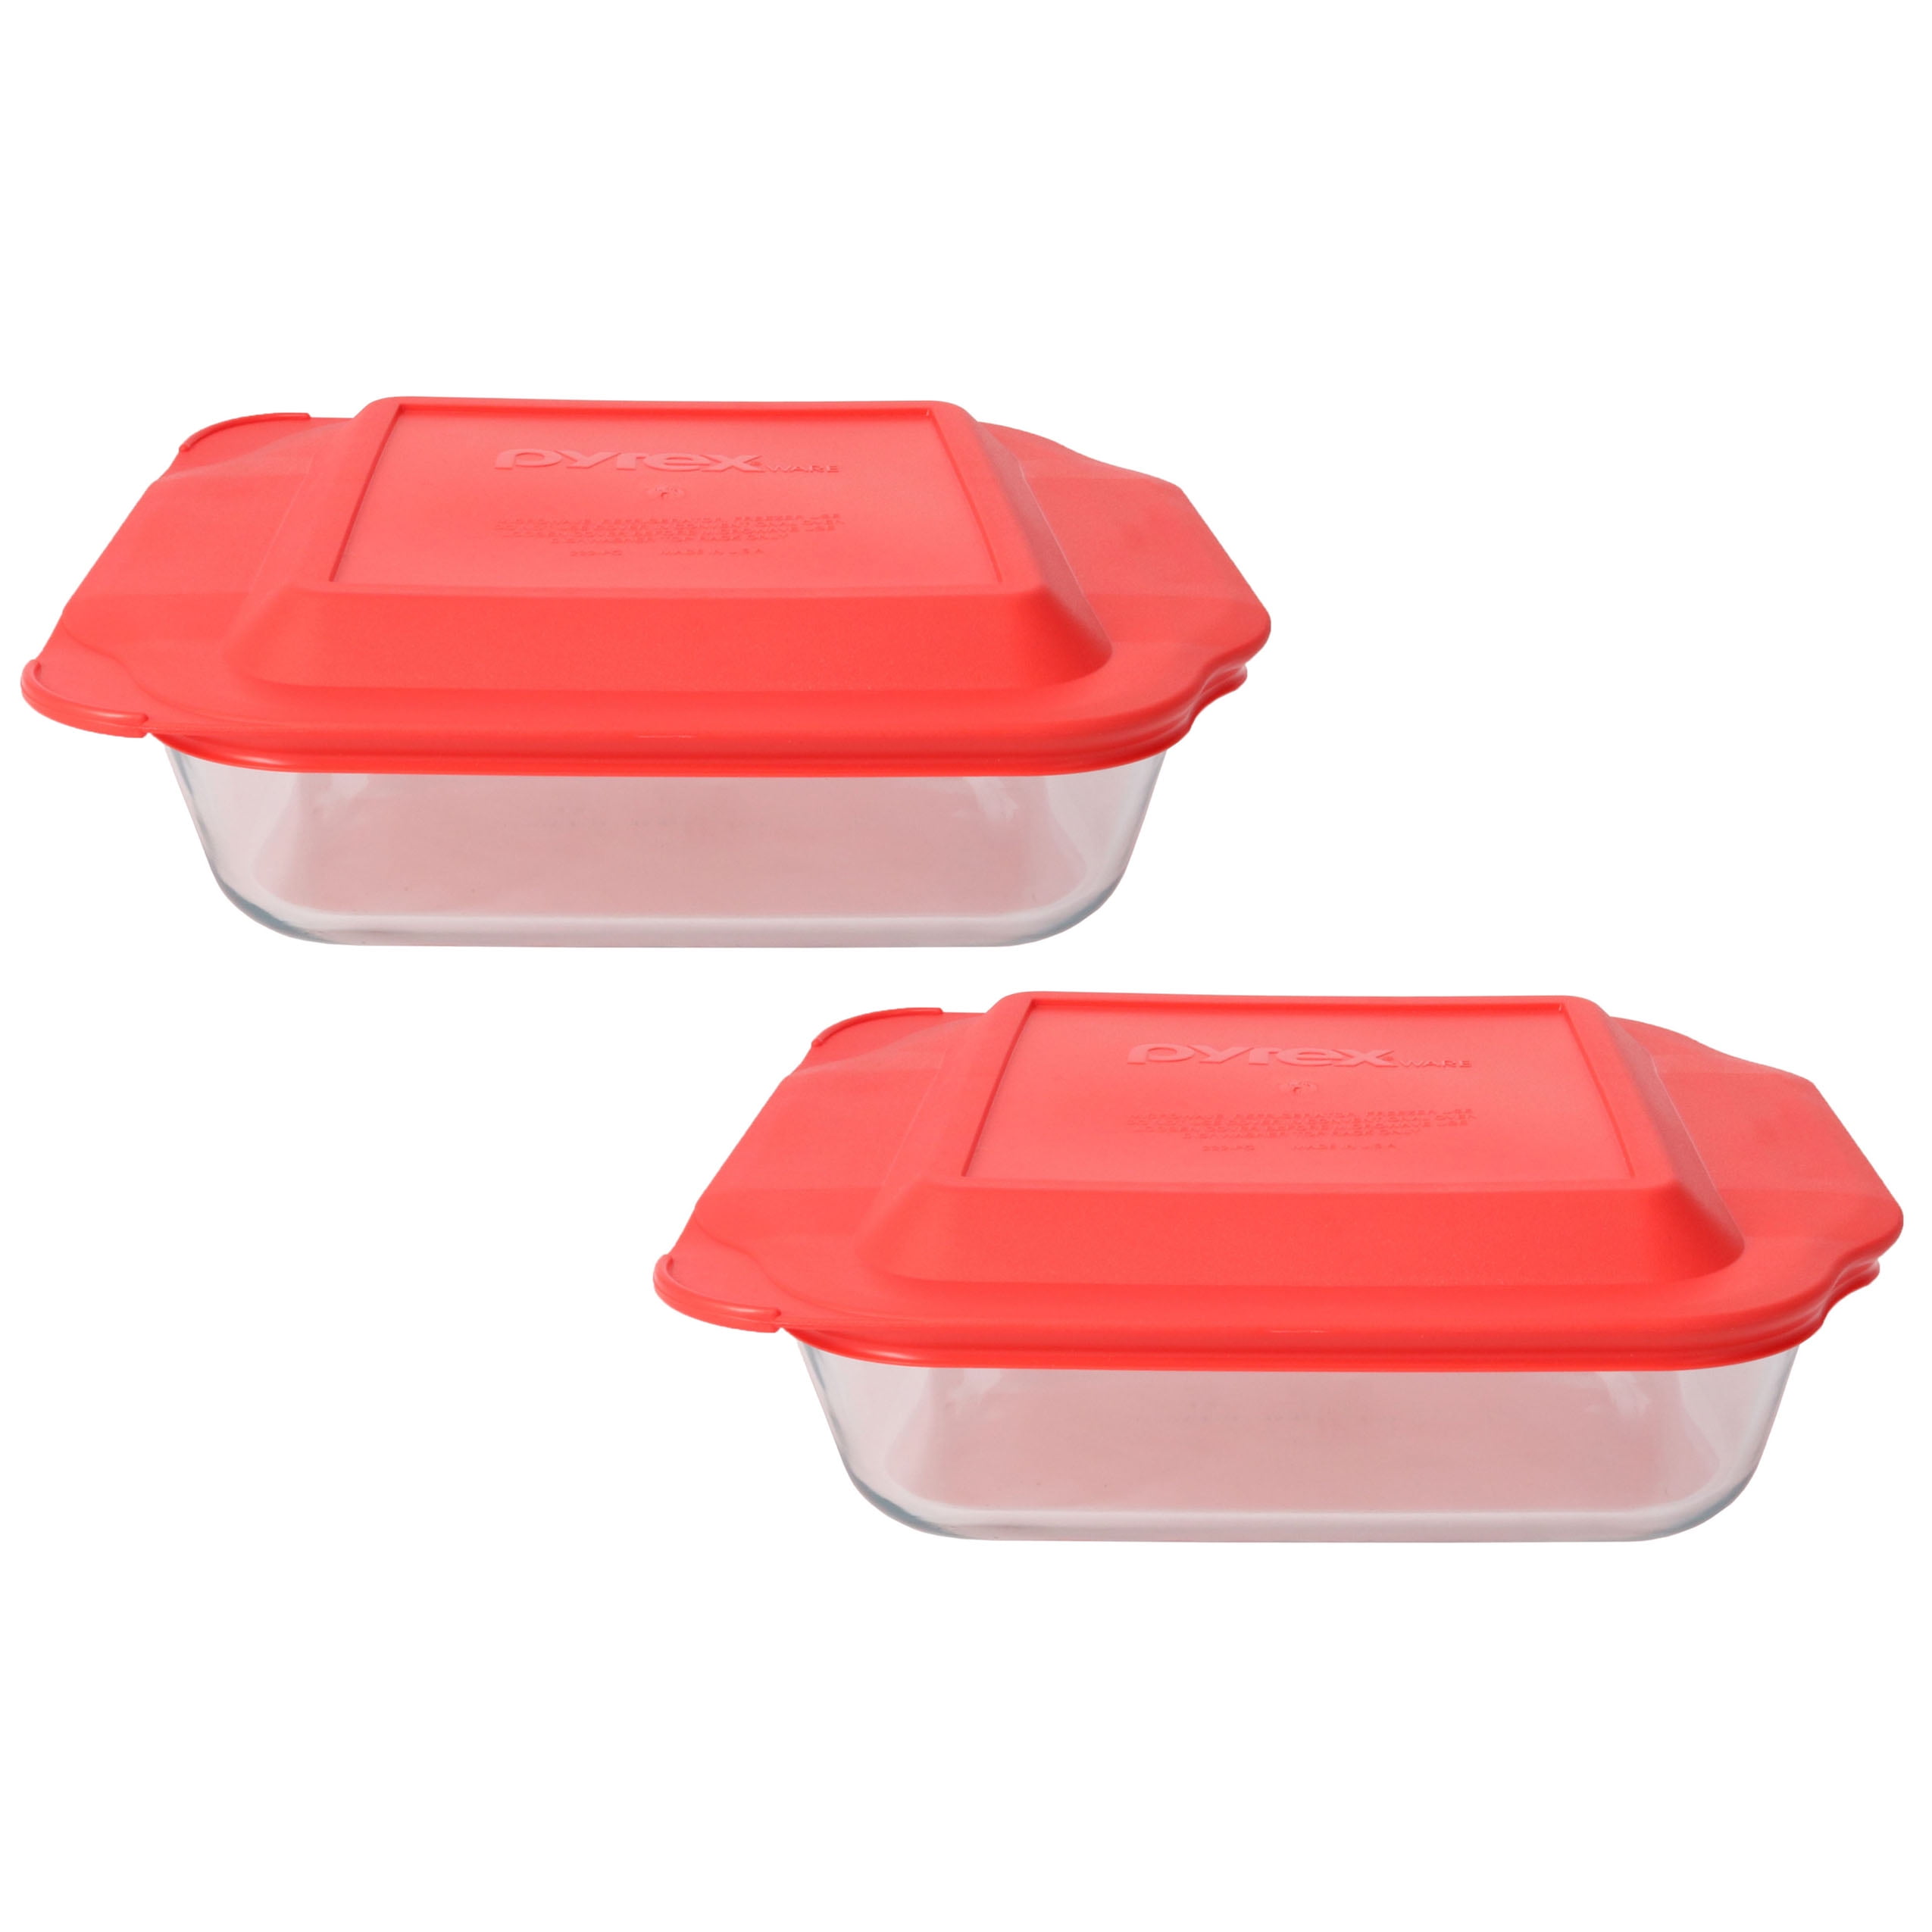 Pyrex 222 Square Glass Baking Dish w/ 222-PC Red Plastic Lid Cover (2 Small Square Pyrex Dish With Lid